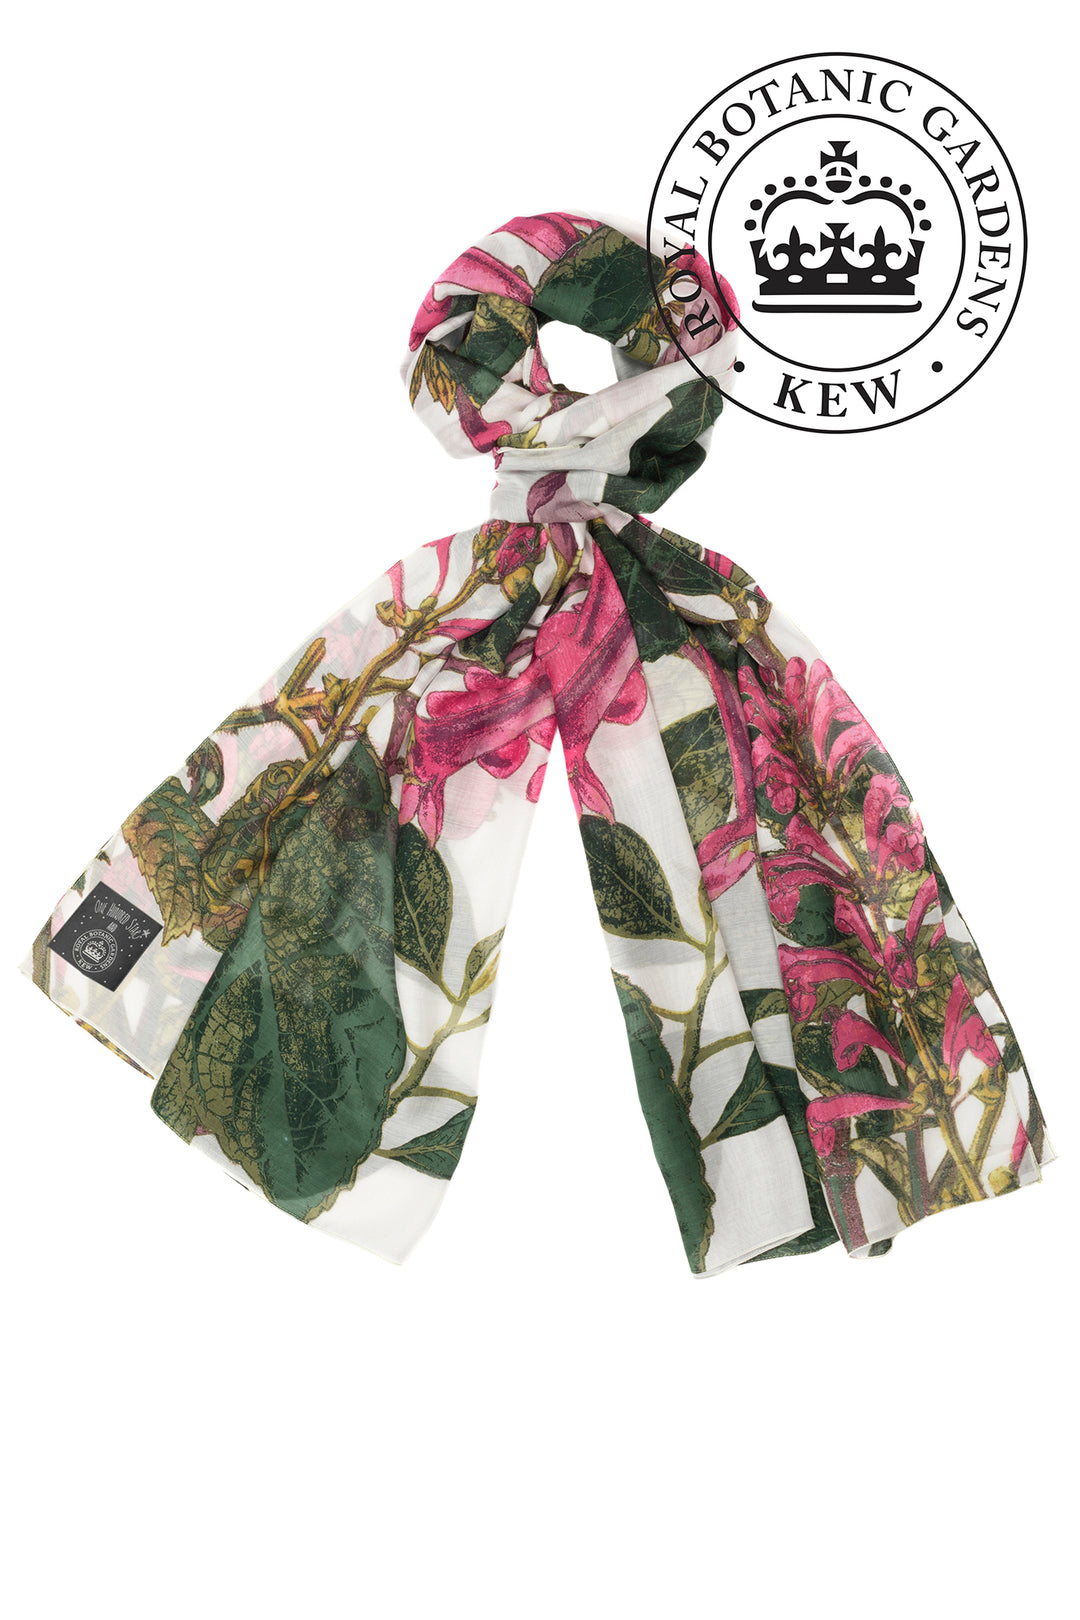 KEW Magnolia White Scarf- Our scarves are a full 100cm x 200cm making them perfect for layering in the winter months or worn as a delicate cover up during the summer seasons. 